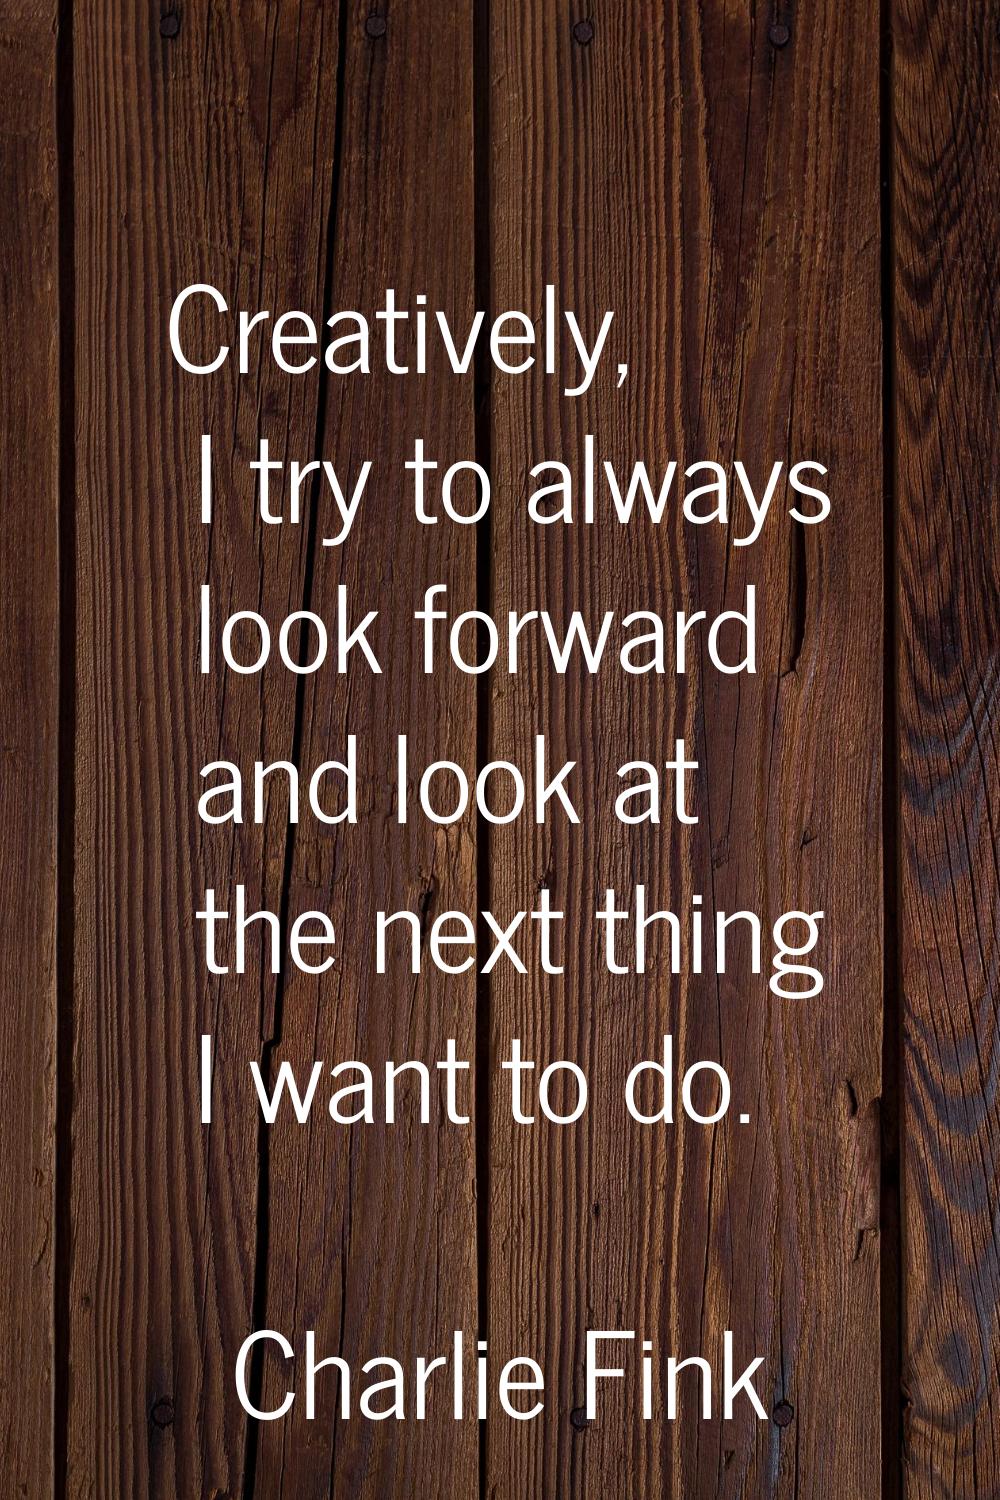 Creatively, I try to always look forward and look at the next thing I want to do.